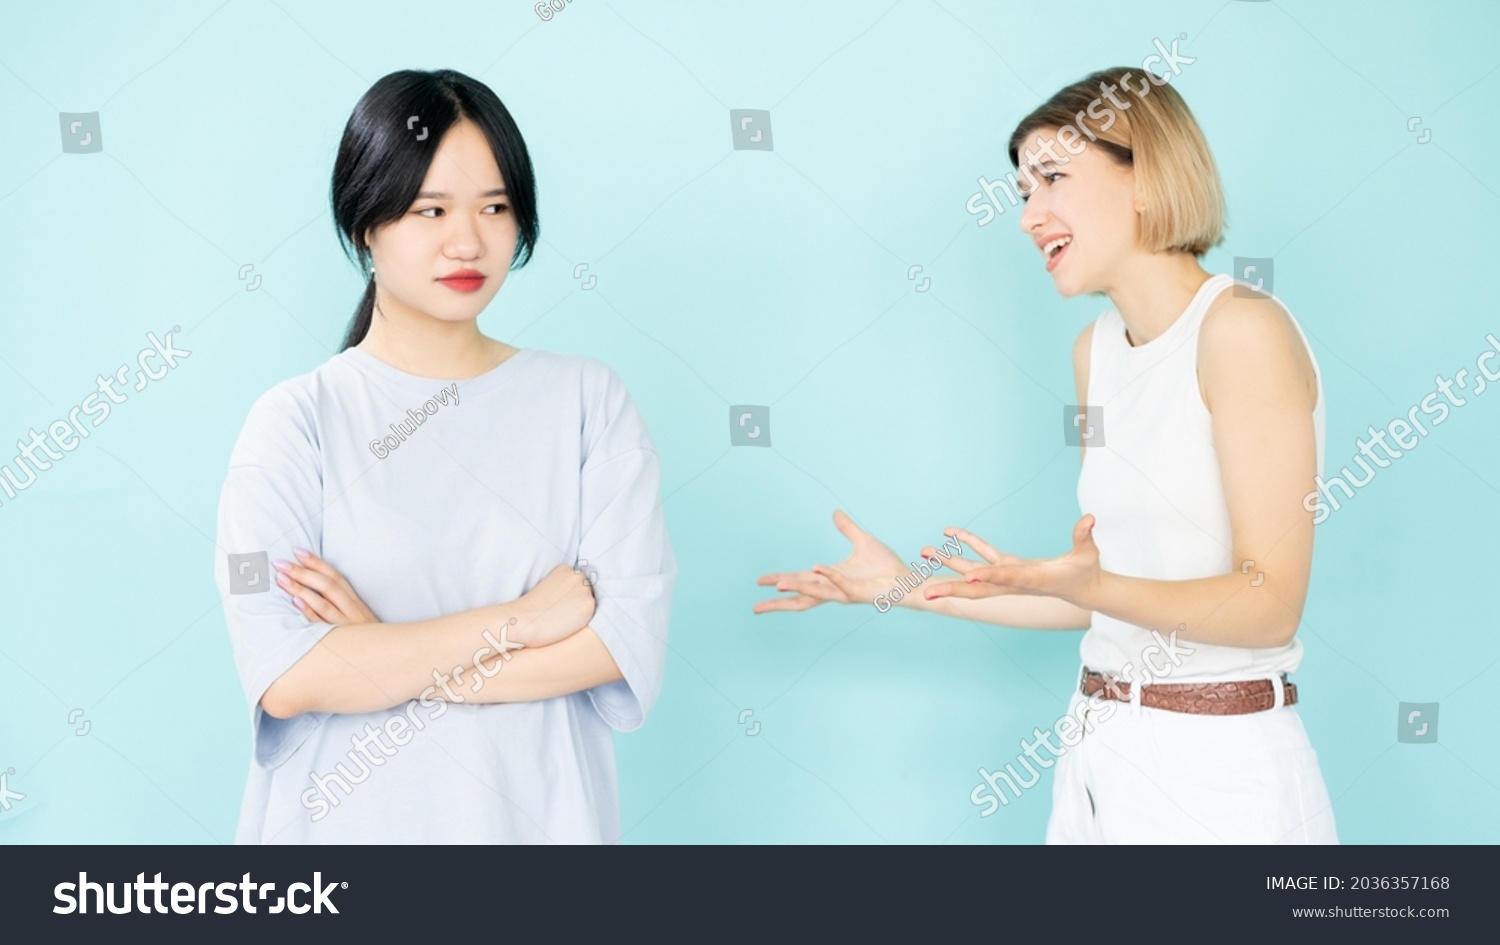 Right proving. Quarrel women. Disagreement arguments. Conflict explanation. Apologizing caucasian lady talking with asian suspicious friend isolated blue. #2036357168